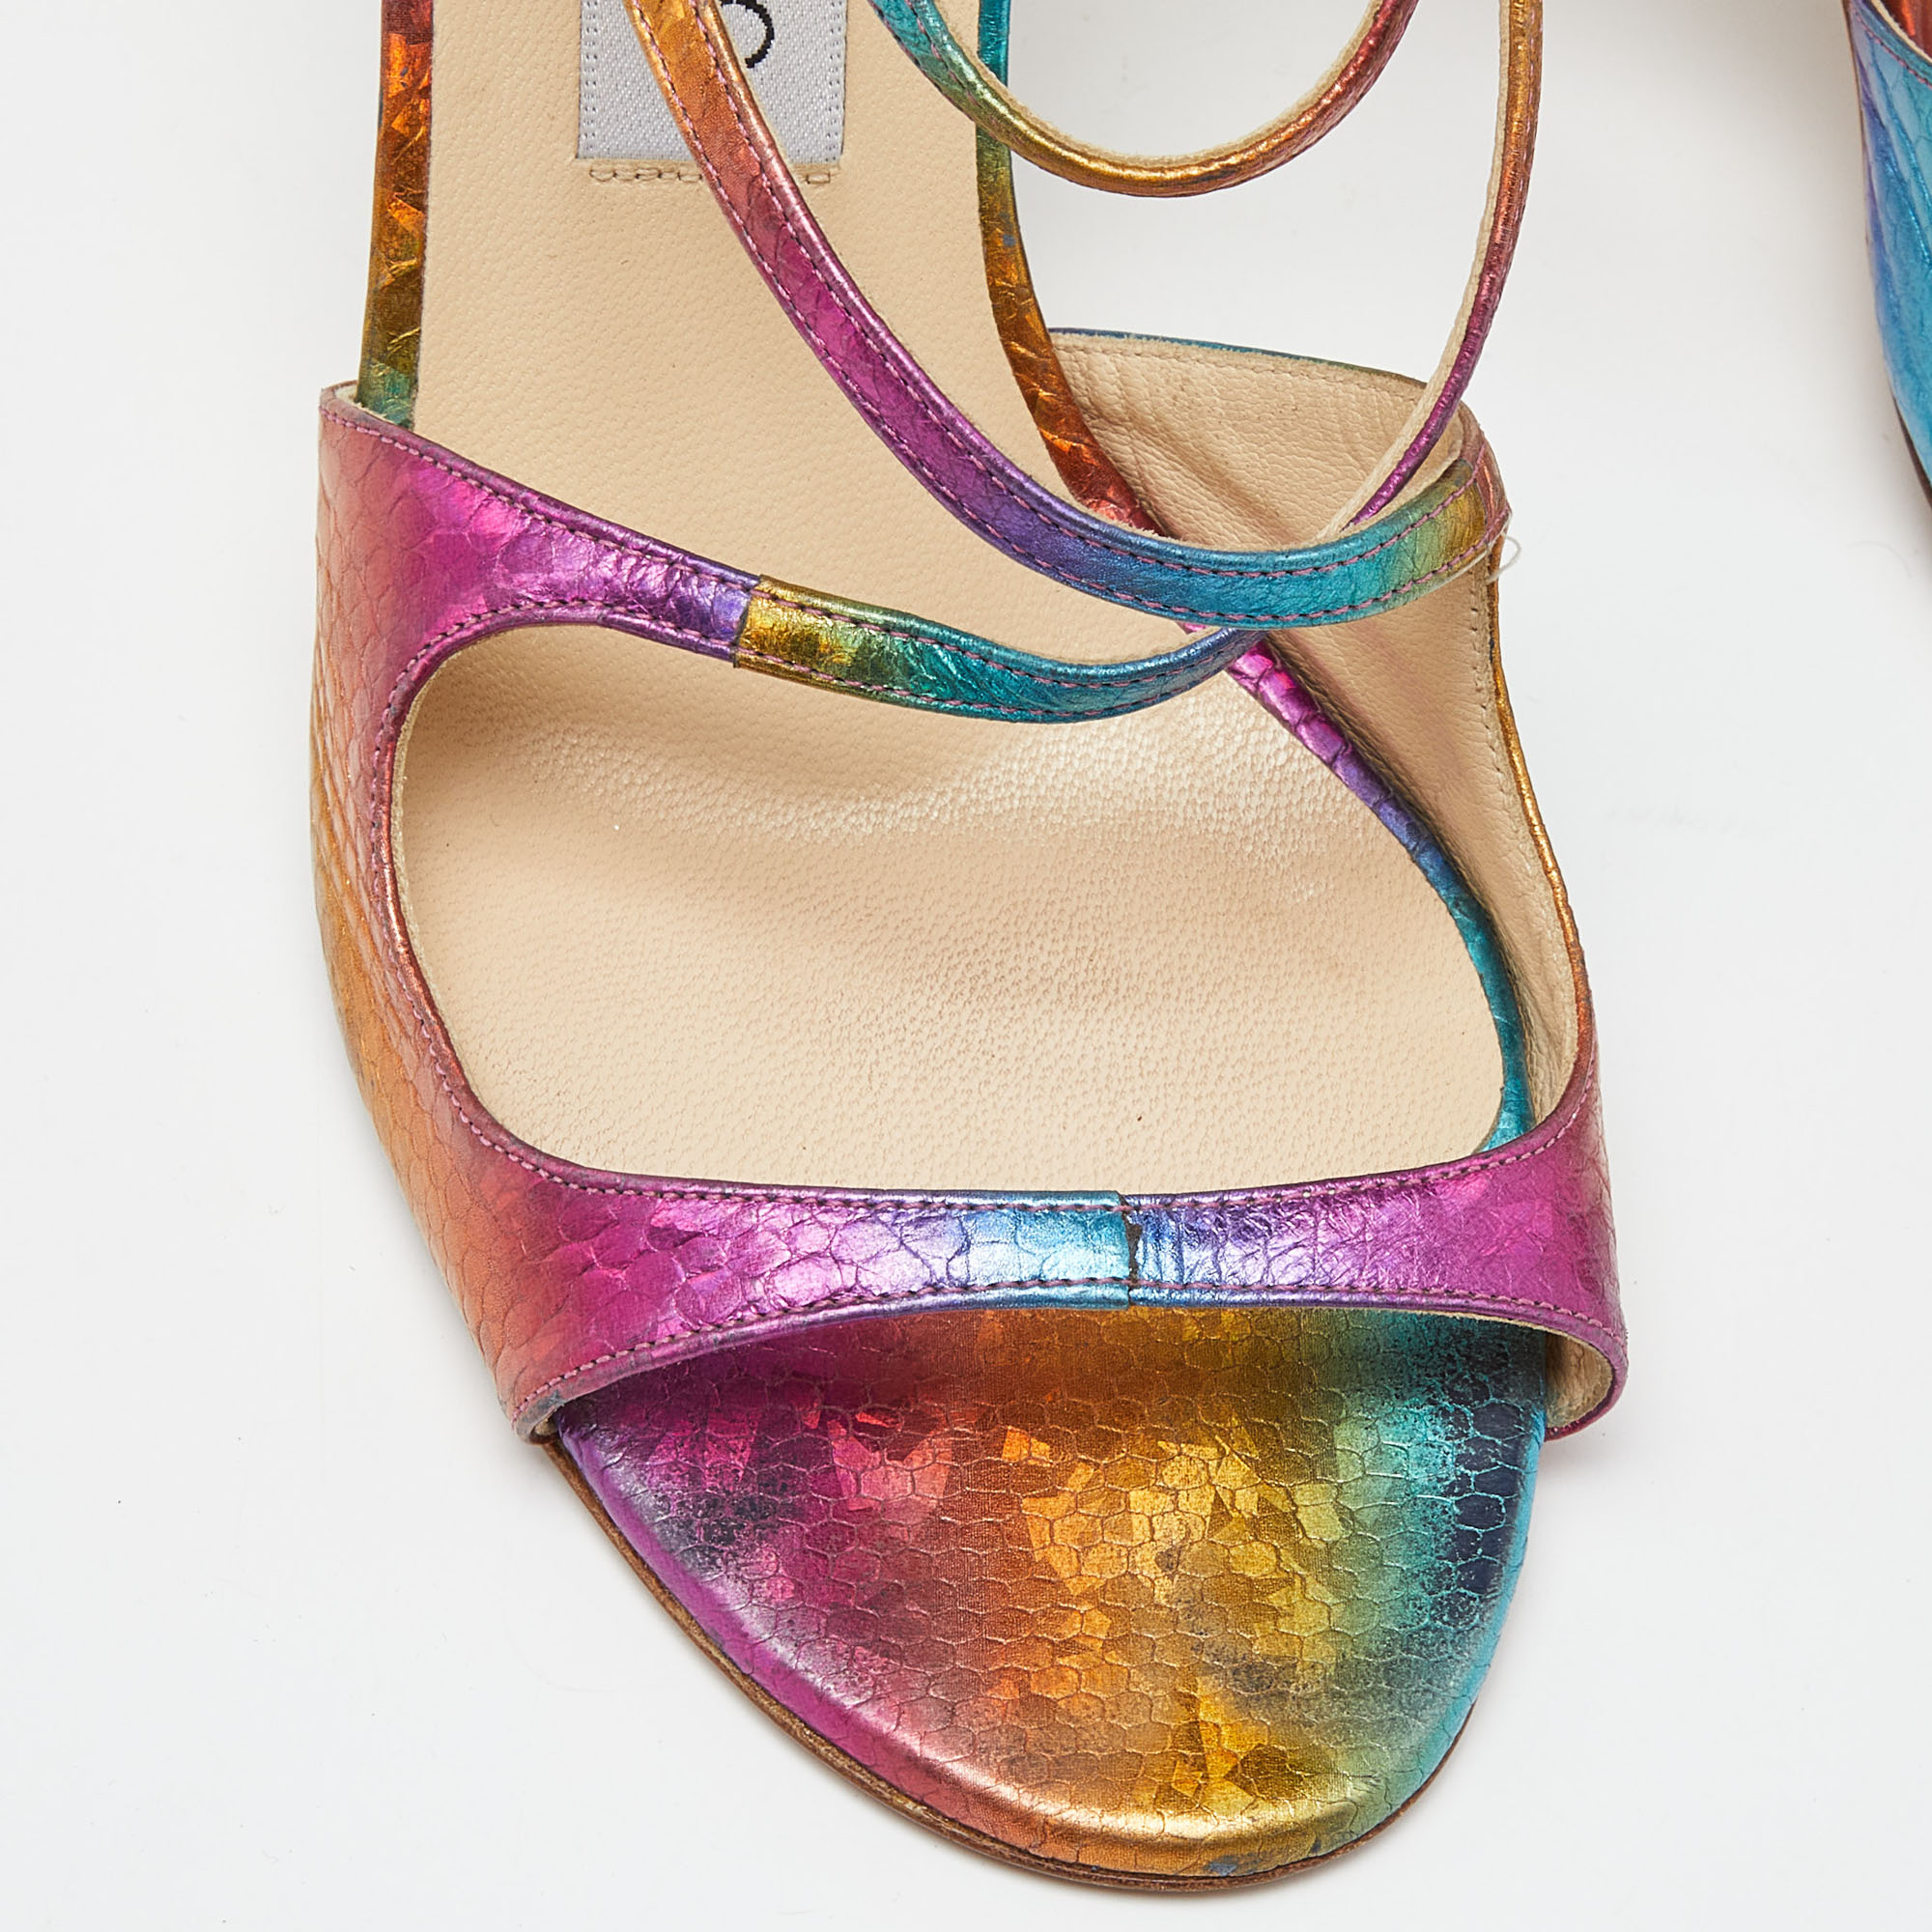 Jimmy Choo Multicolor Python Embossed Leather Criss Cross Strap Sandals Size 38